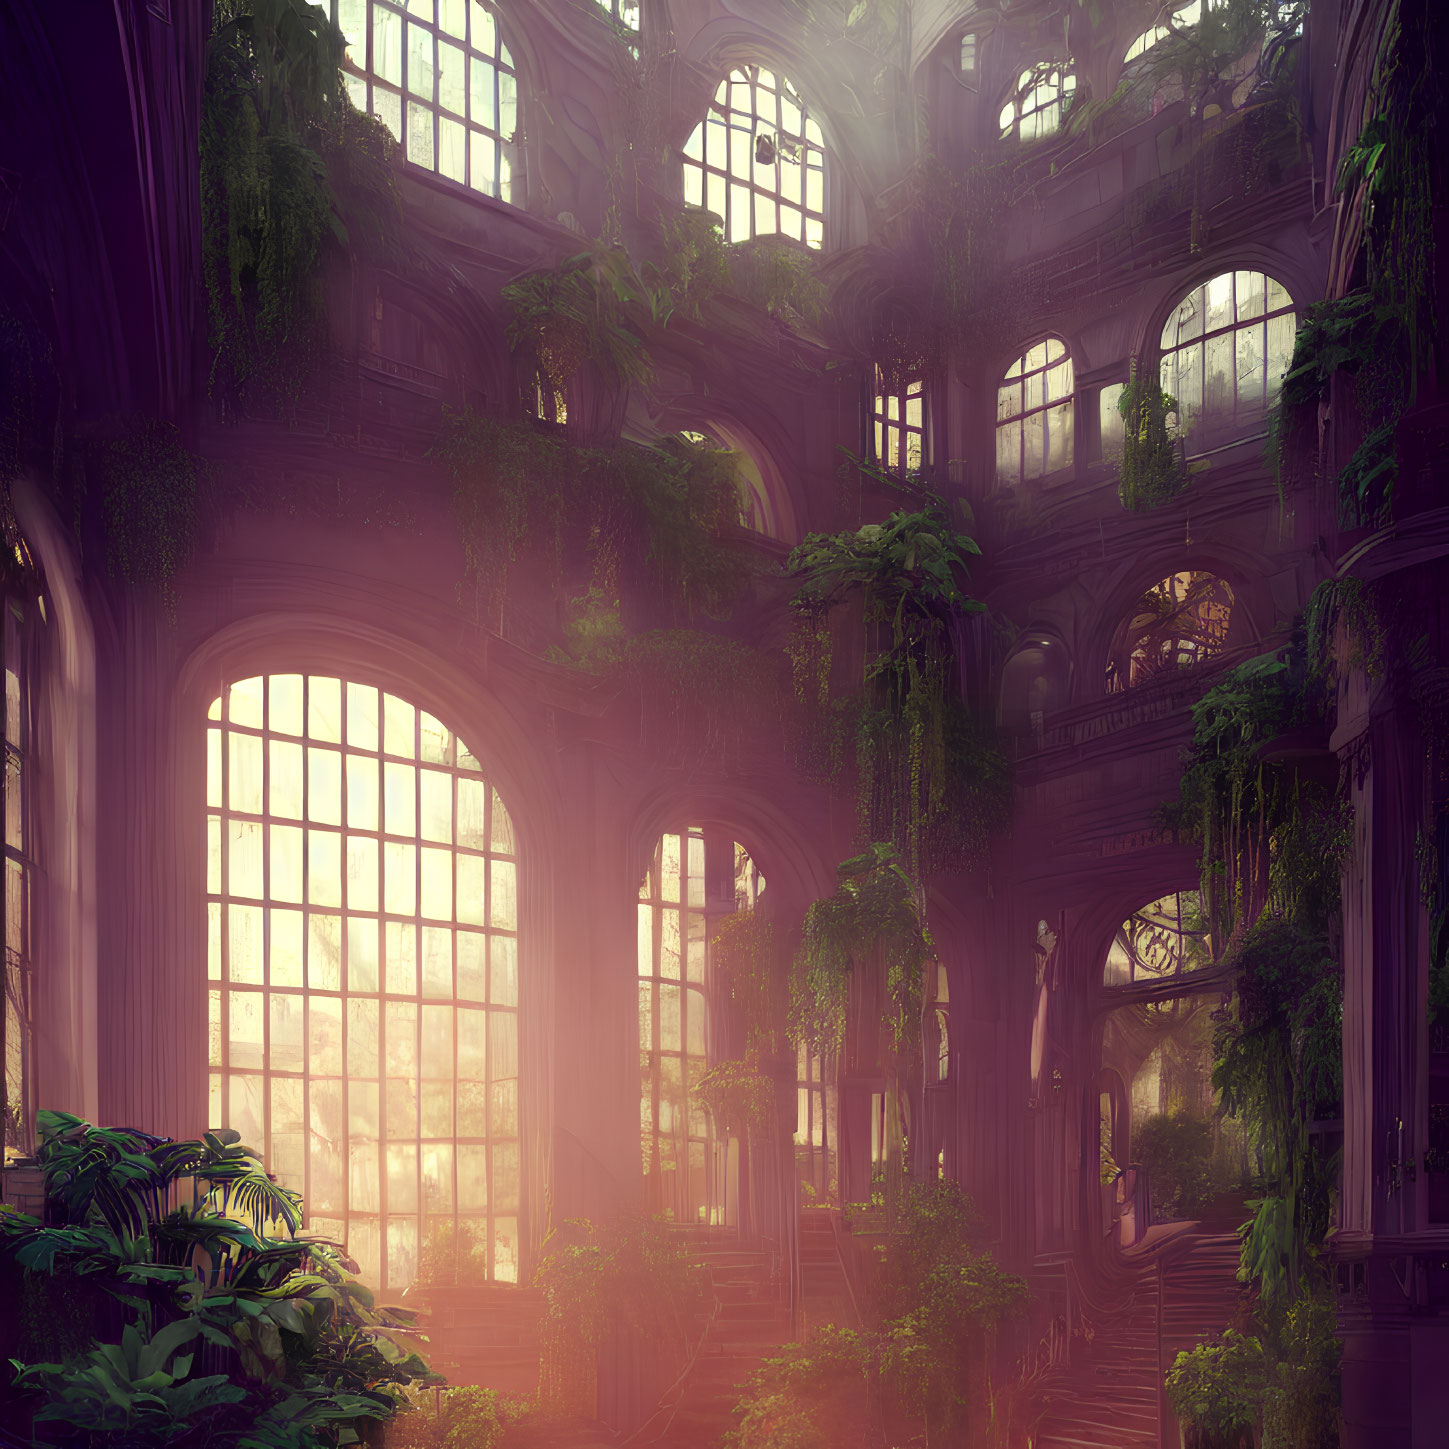 Ethereal abandoned mansion with overgrown greenery and sunlight filtering through windows